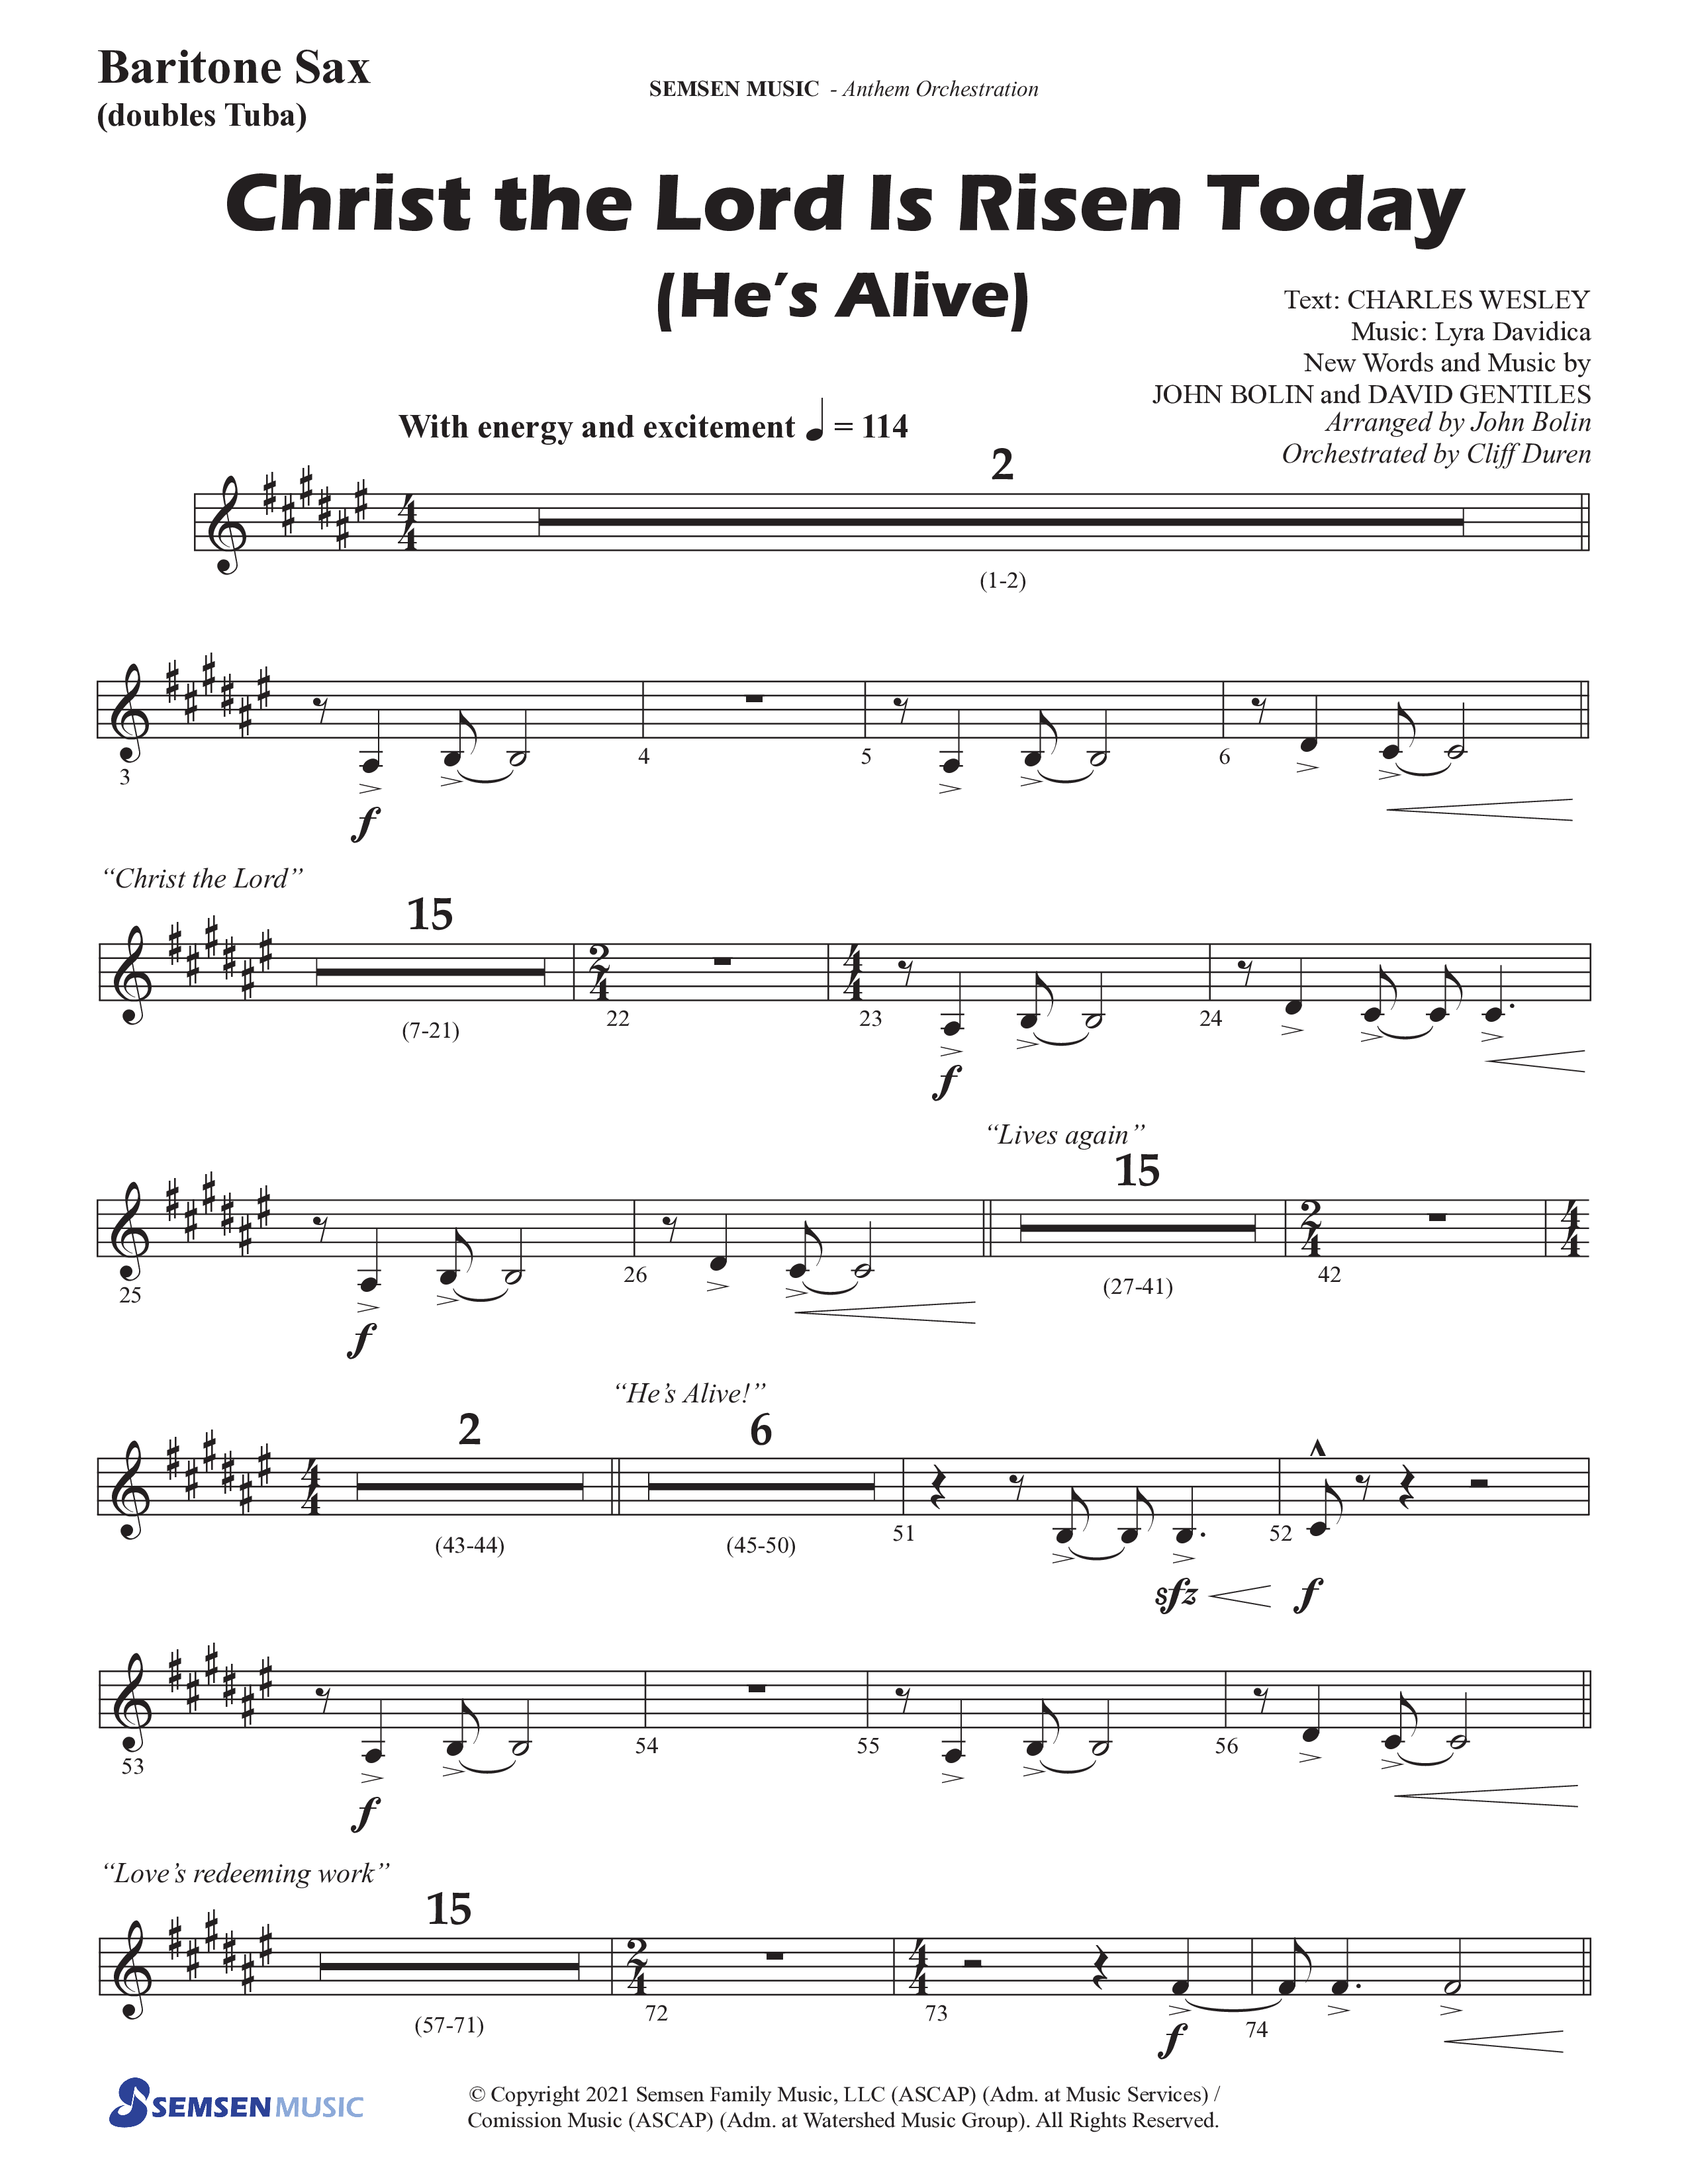 Christ The Lord Is Risen Today (He's Alive) (Choral Anthem SATB) Bari Sax (Semsen Music / Arr. John Bolin / Orch. Cliff Duren)